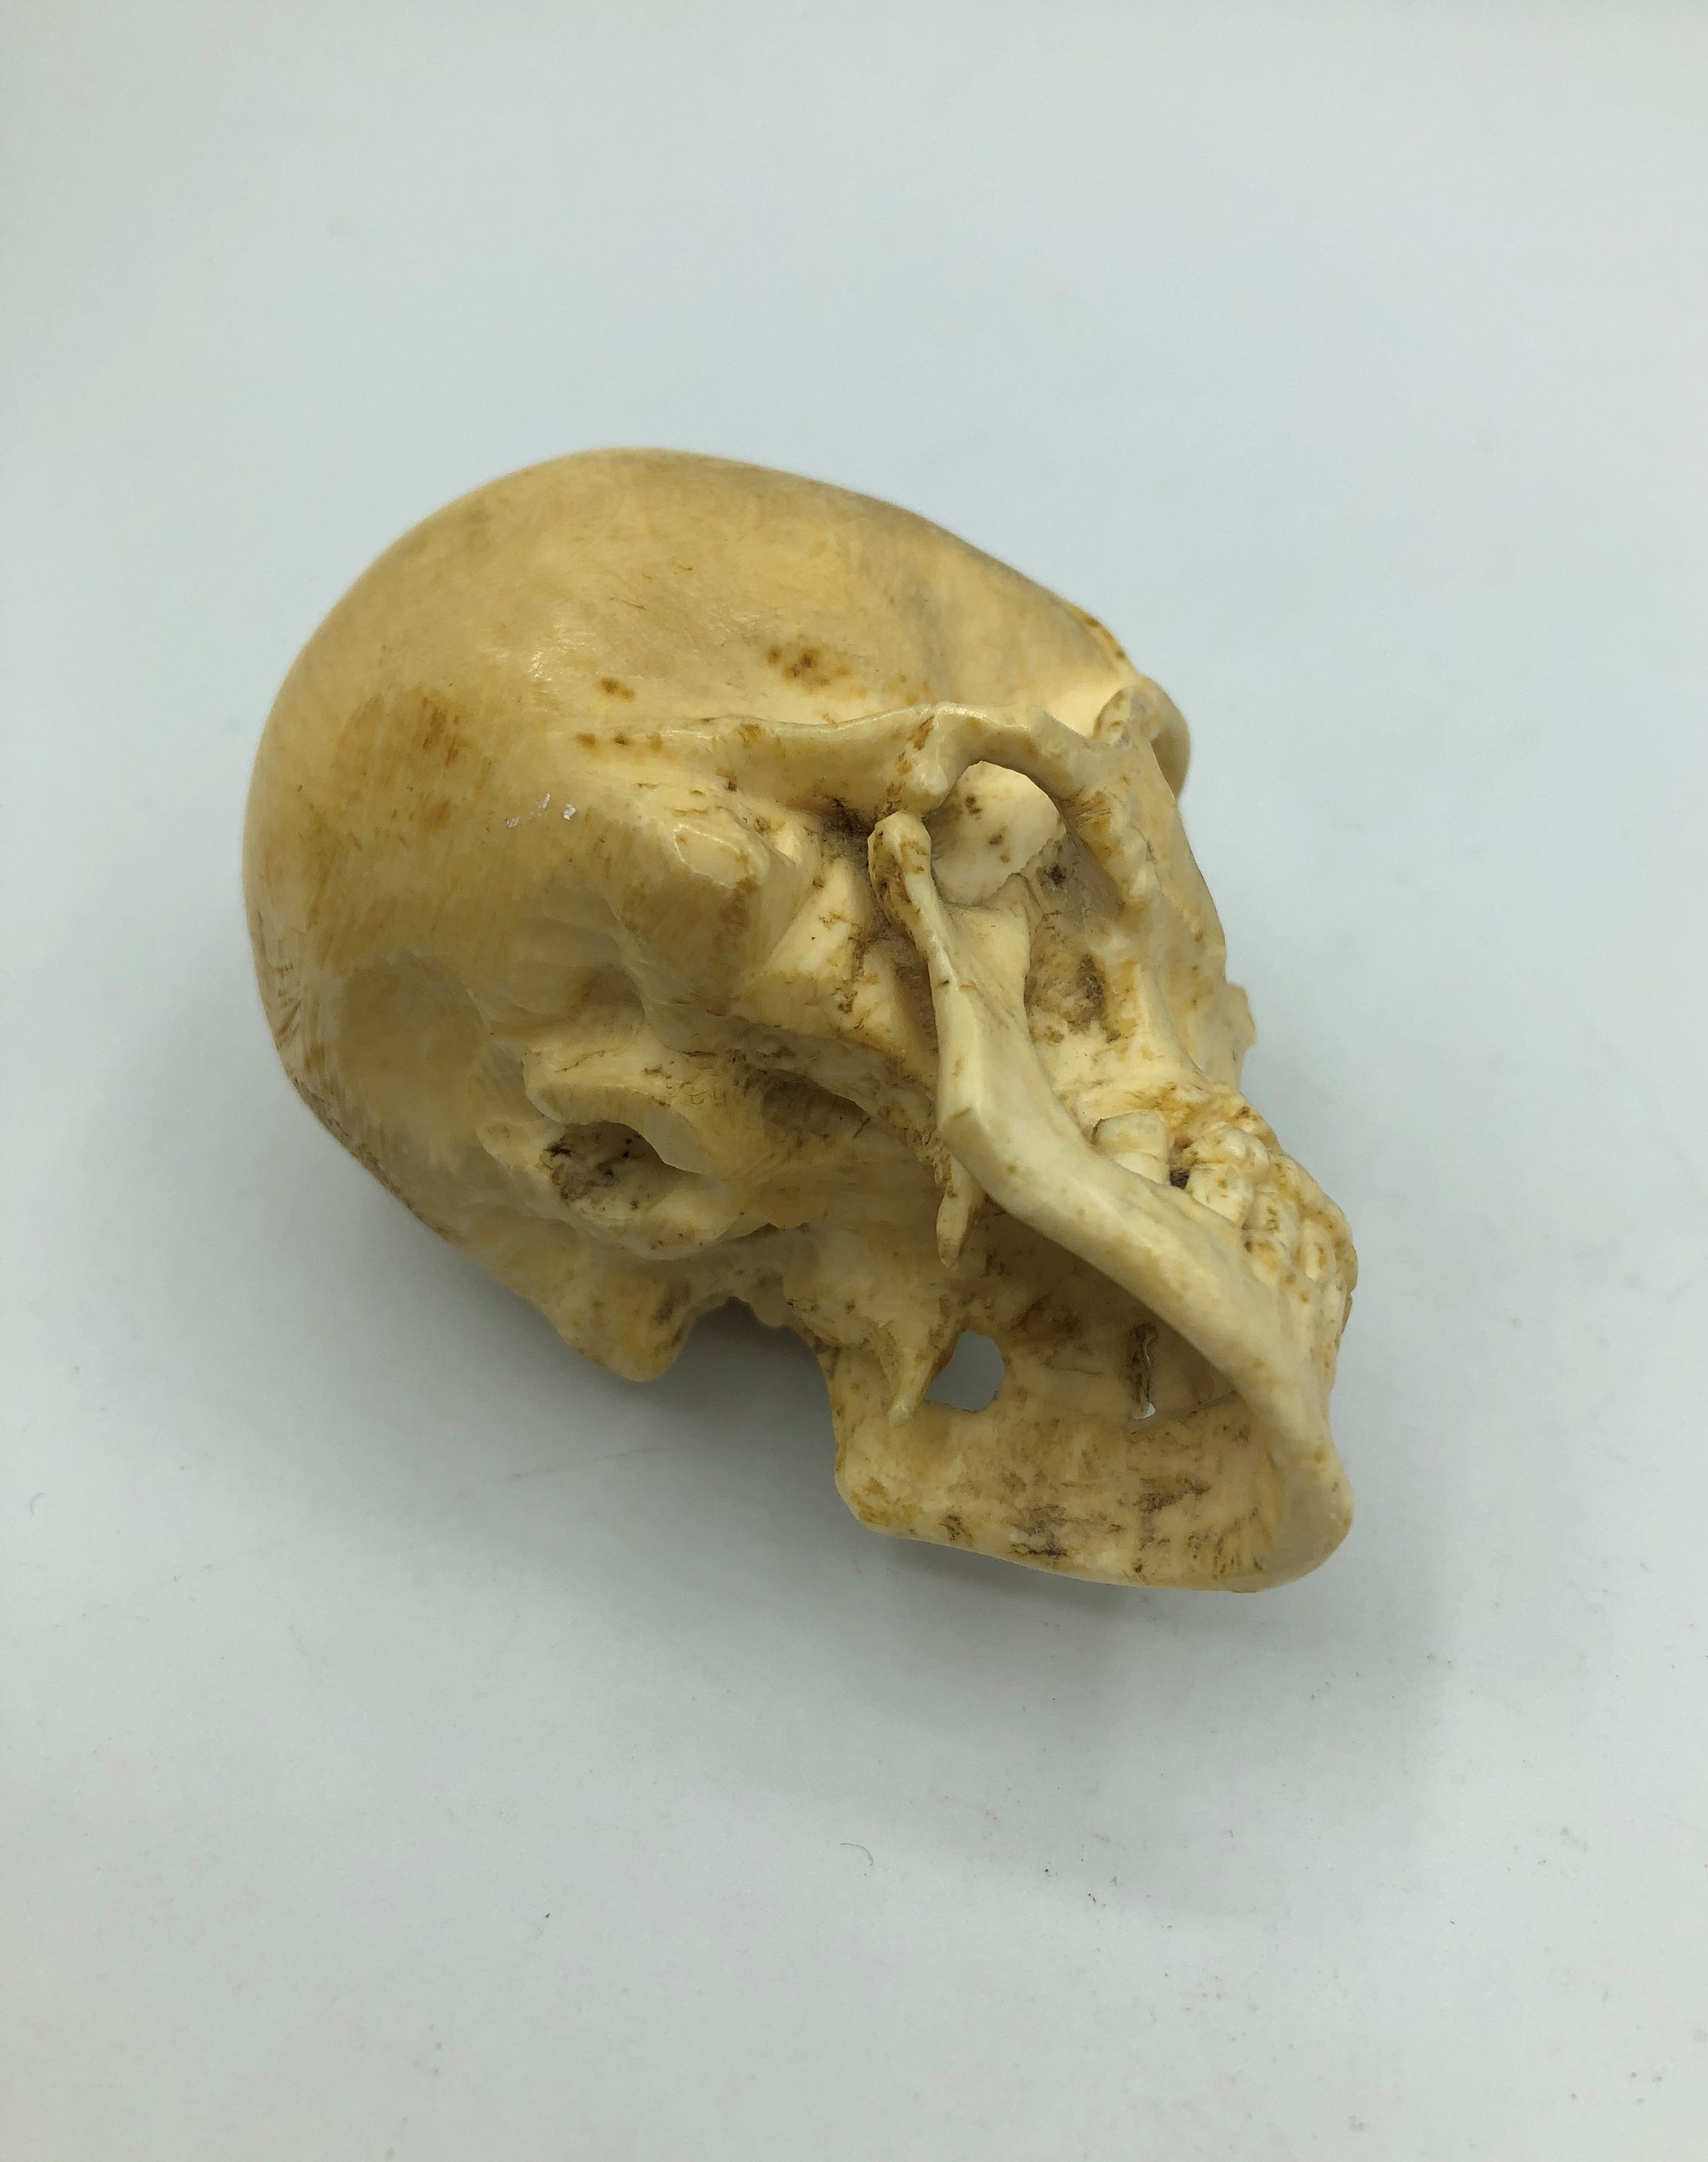 A miniature skull carved in bone circa 1900 - Image 5 of 5